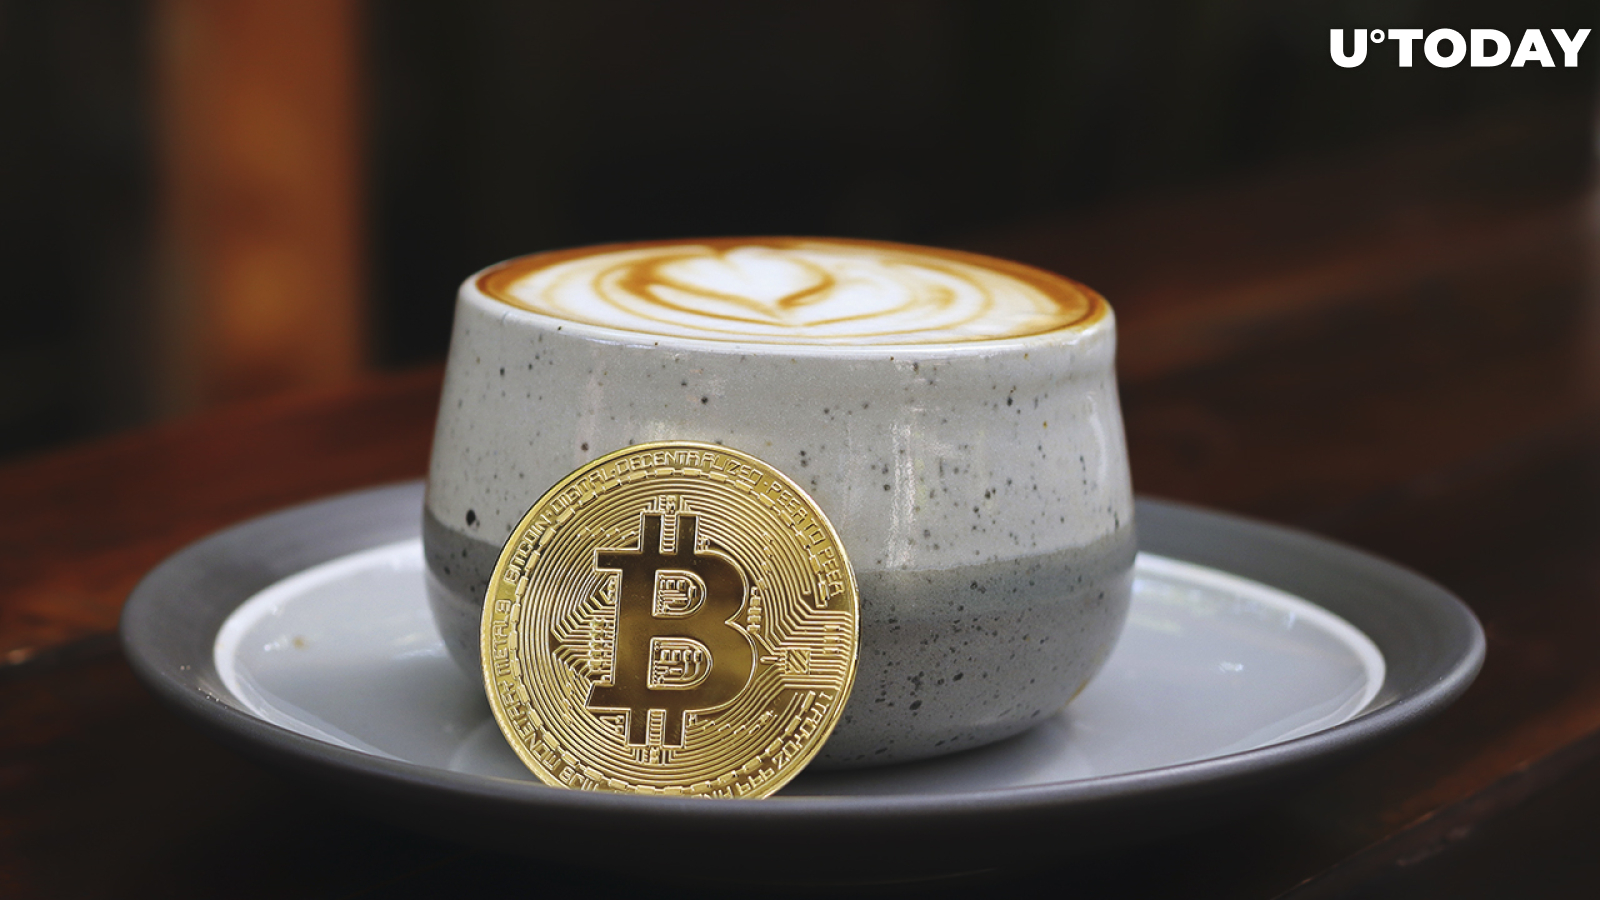 XRP, Litecoin, Bitcoin and Other Cryptocurrencies to Be Accepted at Britain's First Crypto Cafe